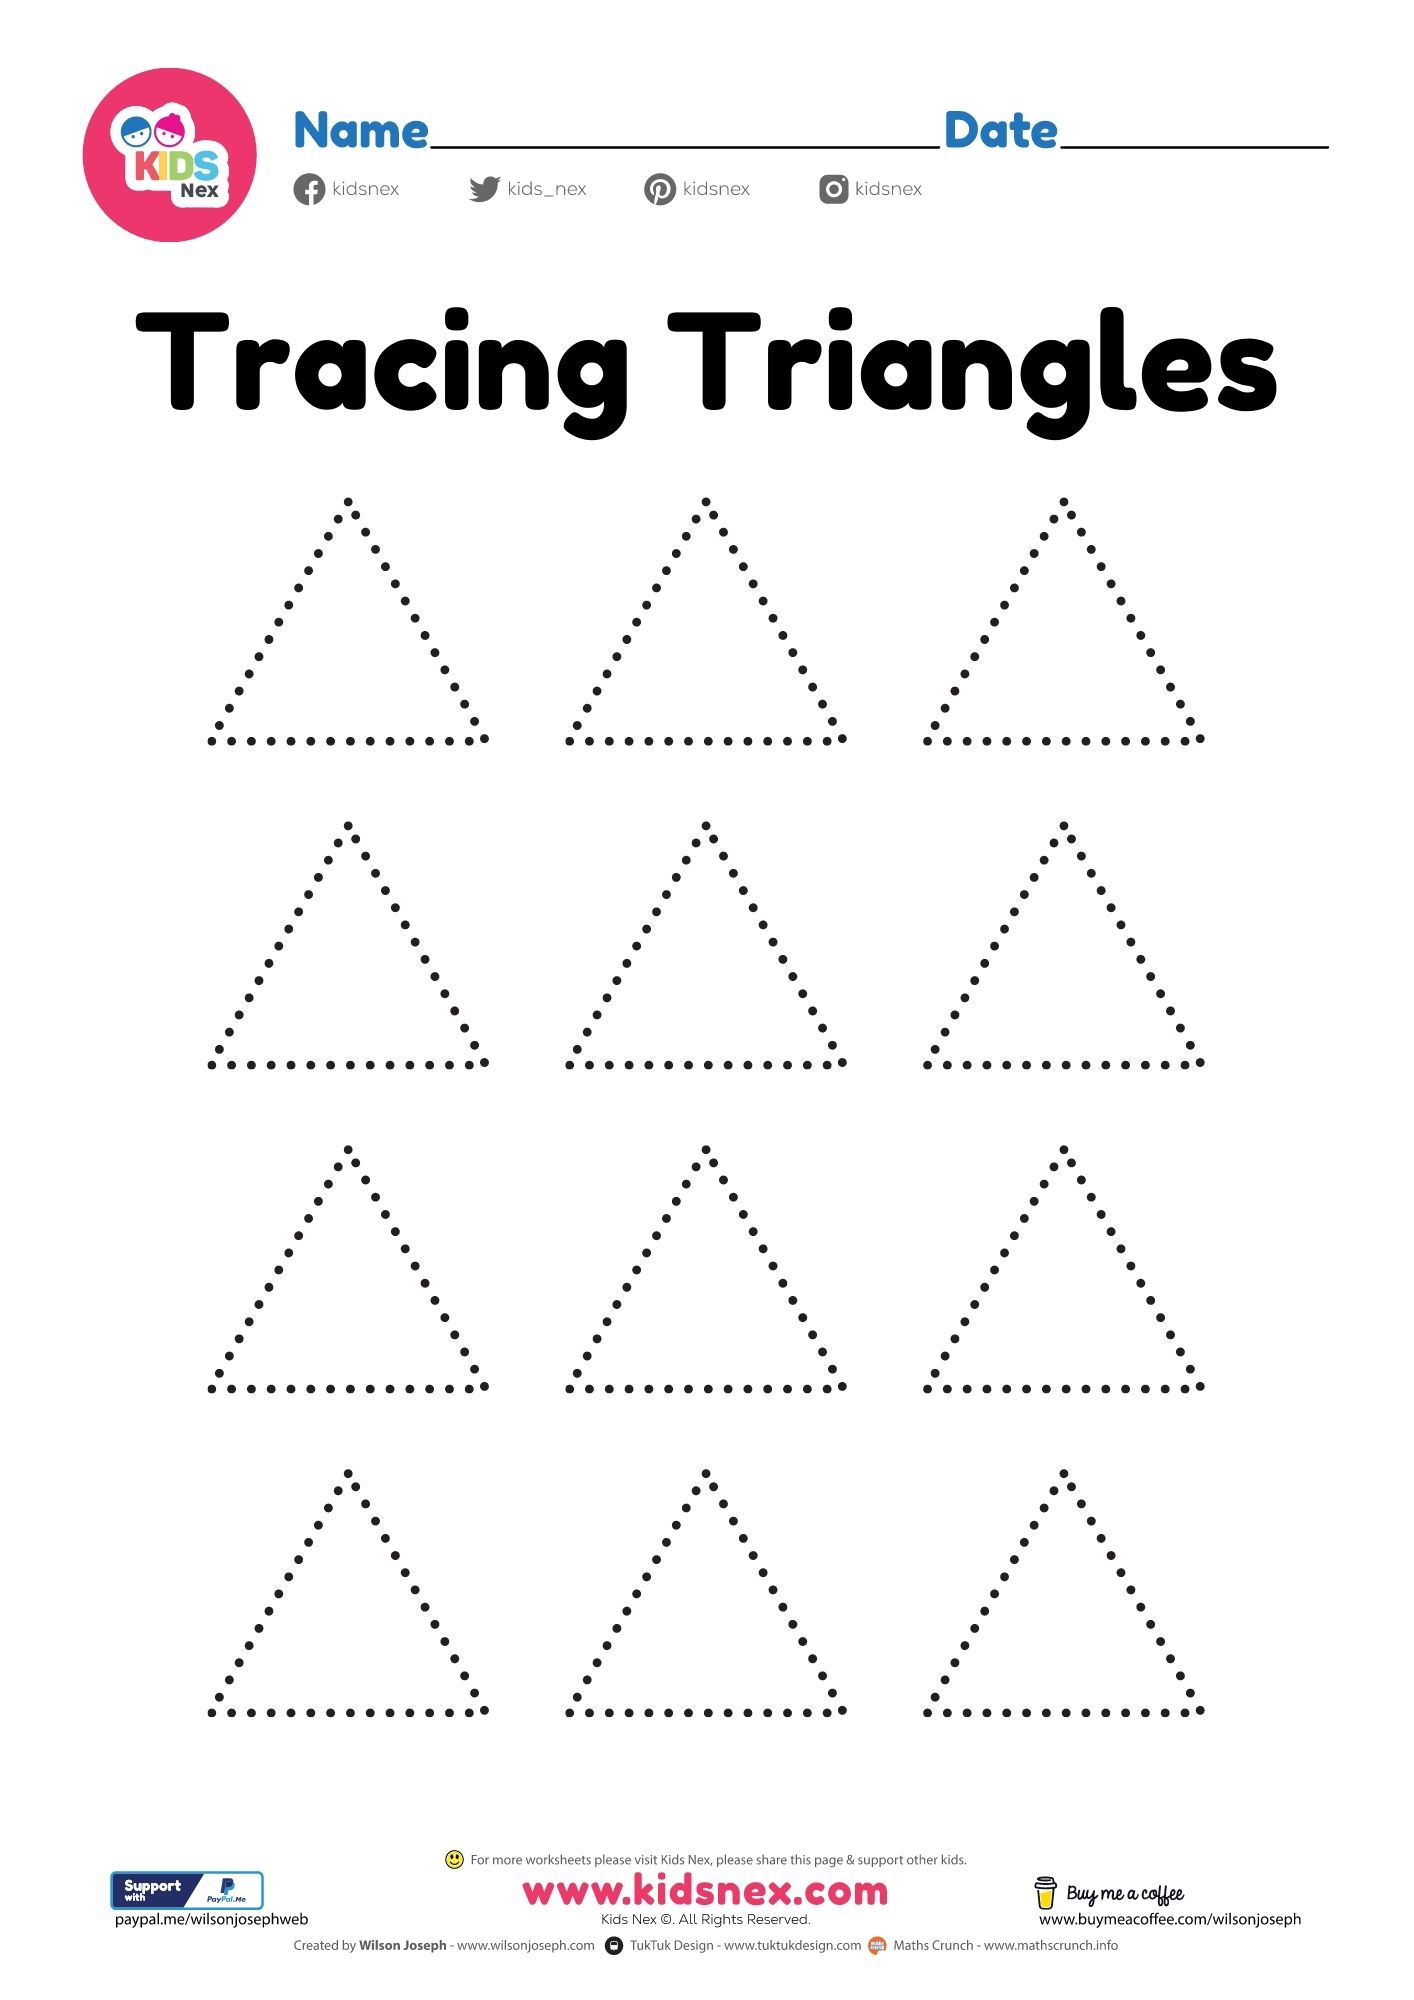 Tracing triangle shapes worksheet